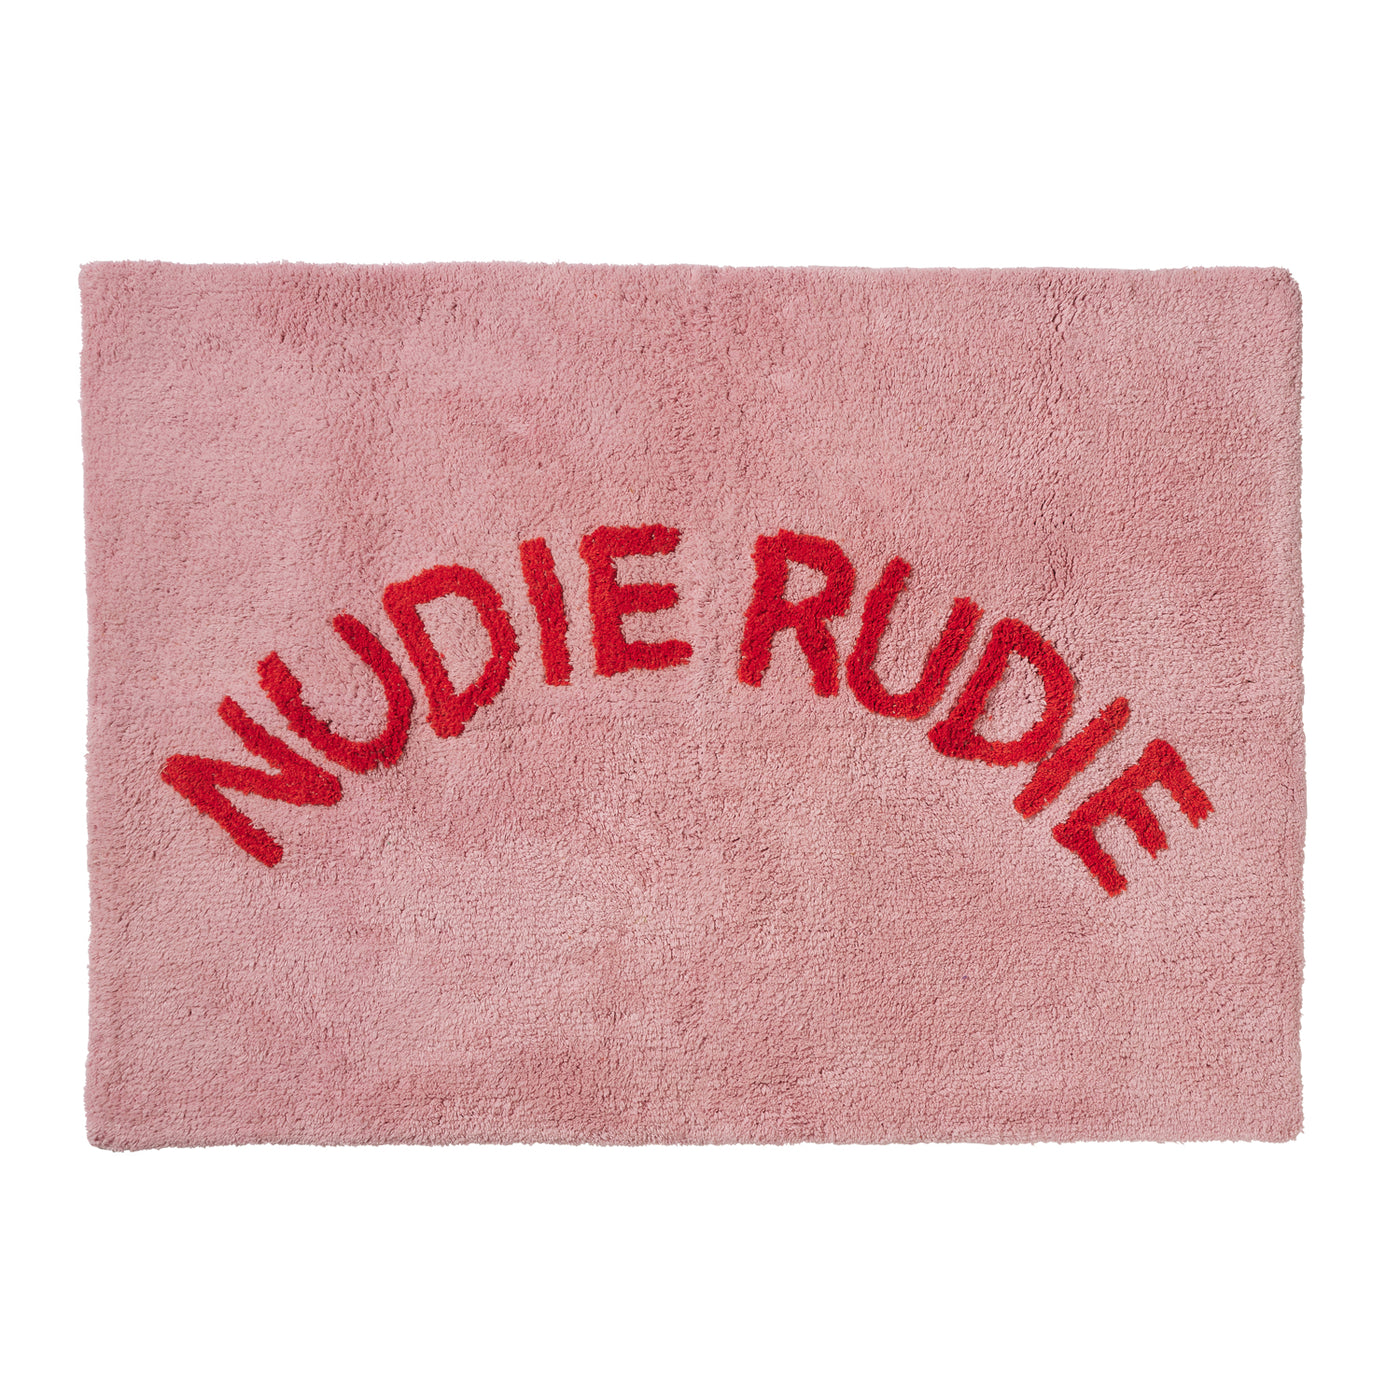 Tula hand tufted nudie rudie bath mat in lilac and red